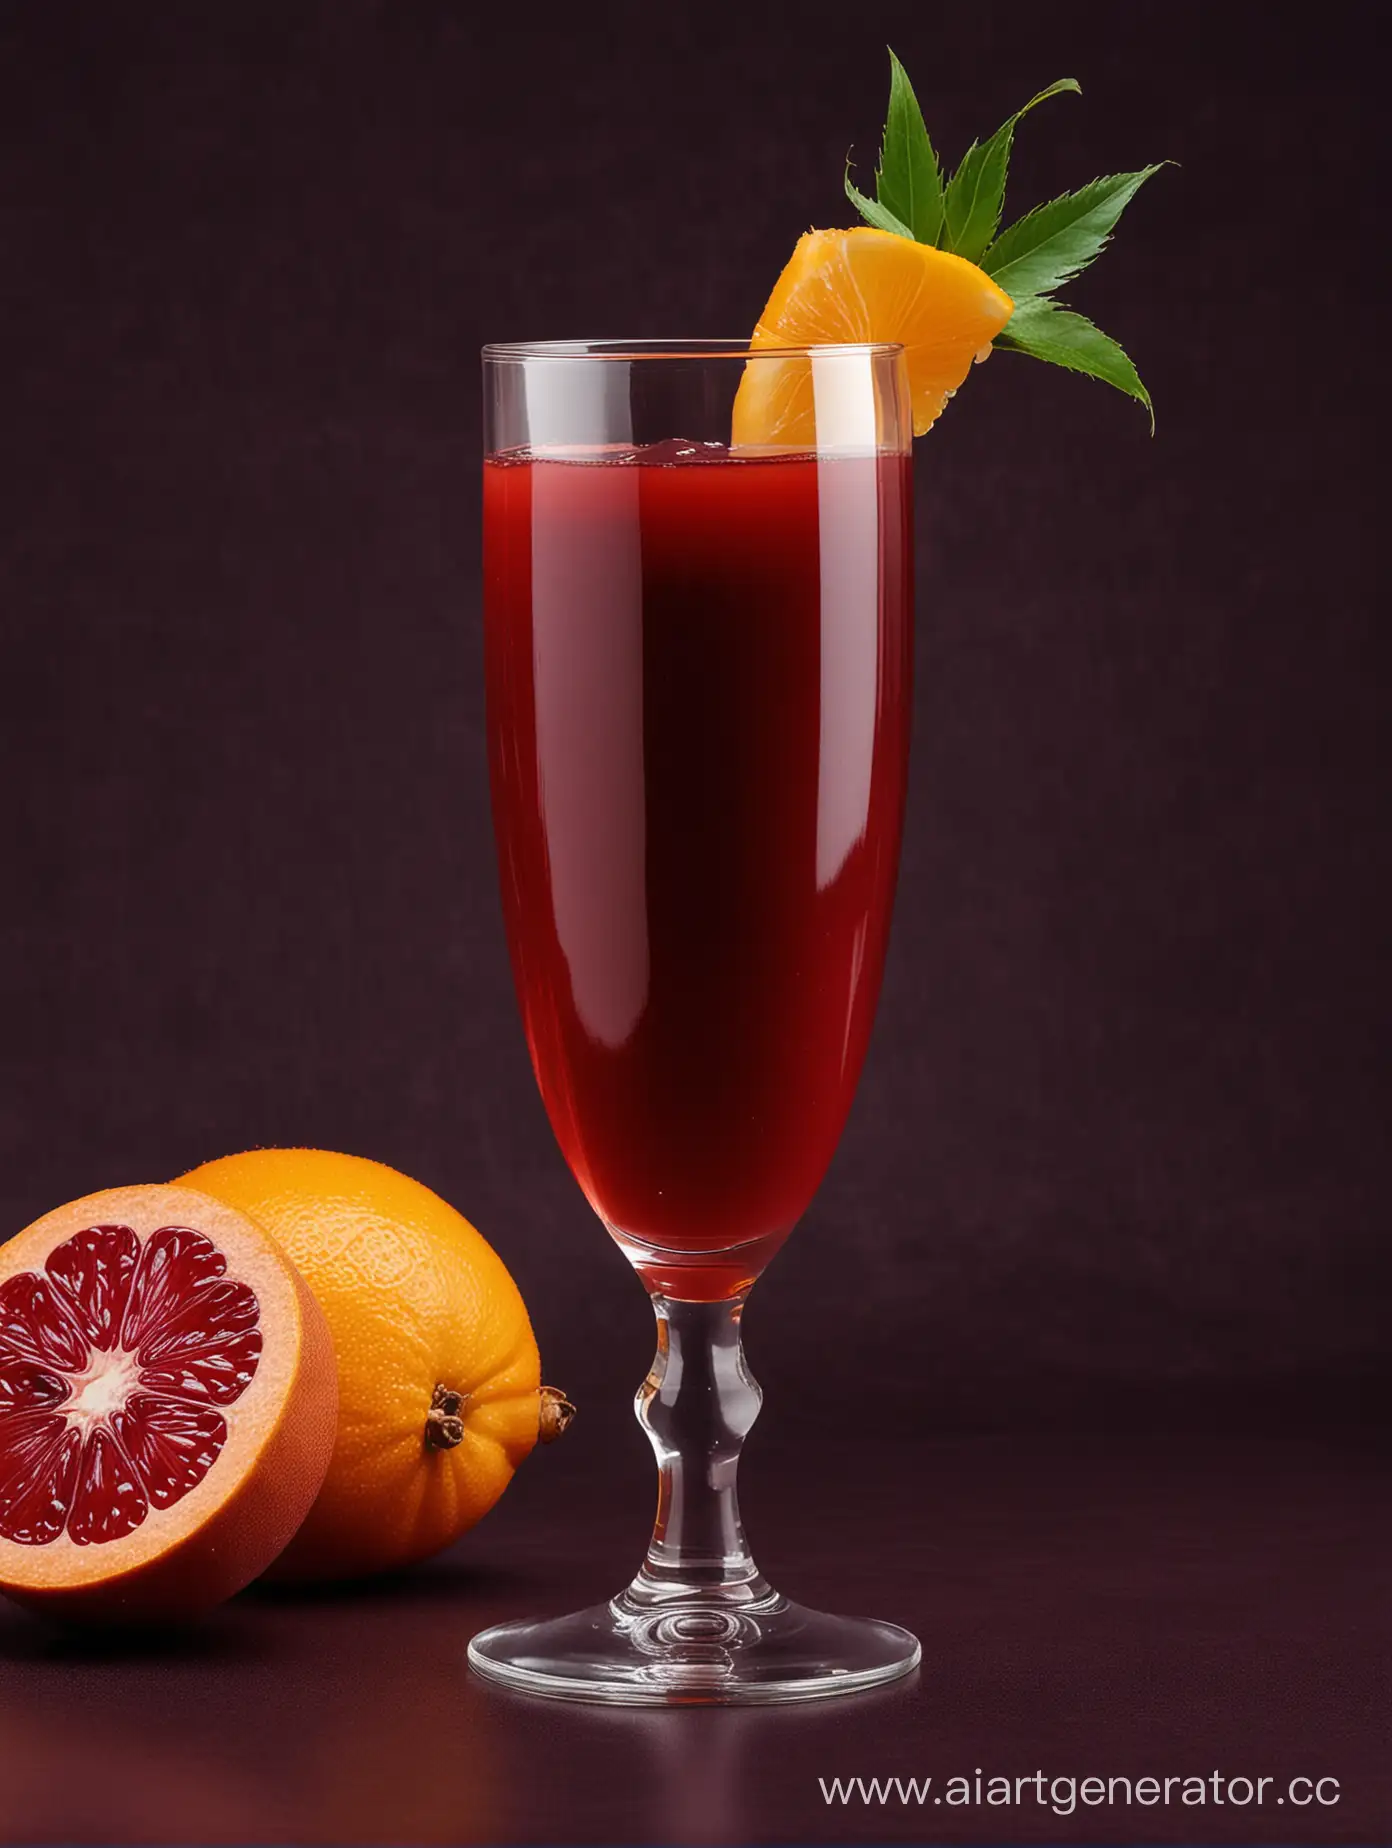 Vibrant-AkebiFruit-and-Juice-in-Classic-Glass-on-Rich-Maroon-Background